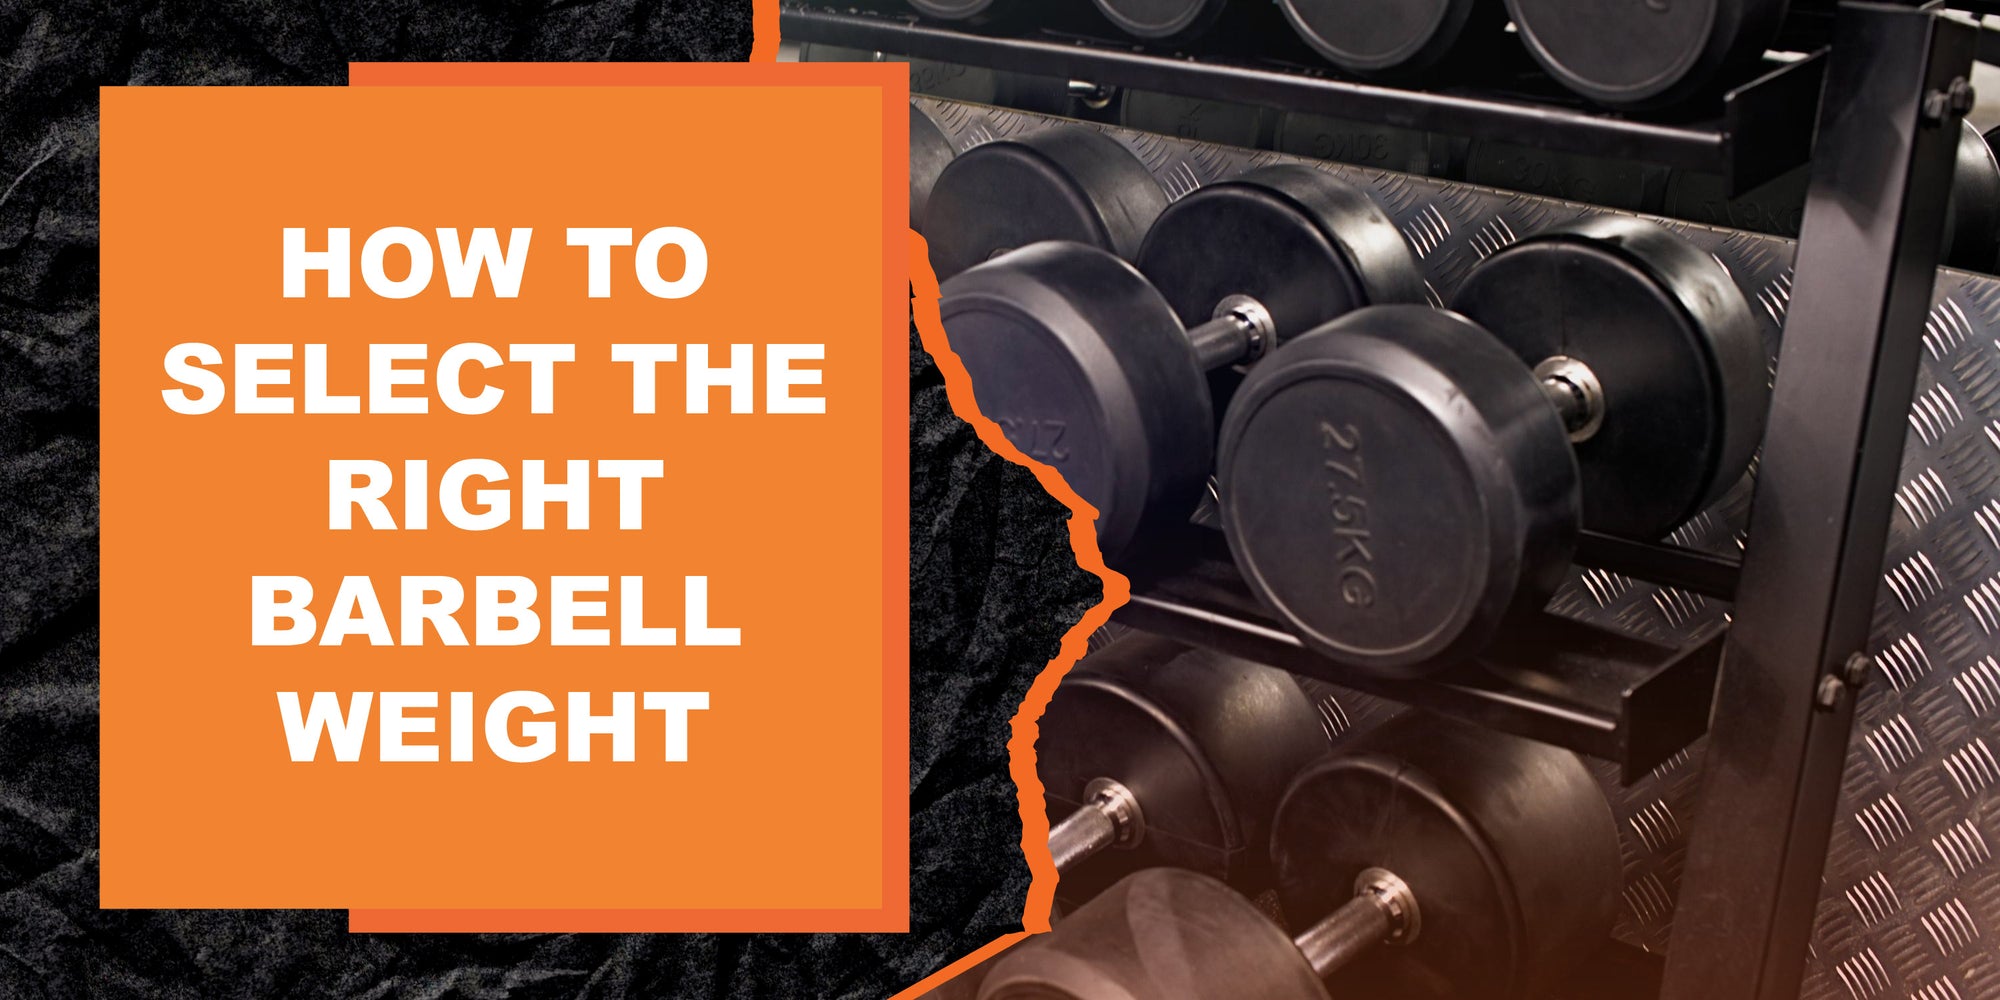 How to Select the Right Barbell Weight